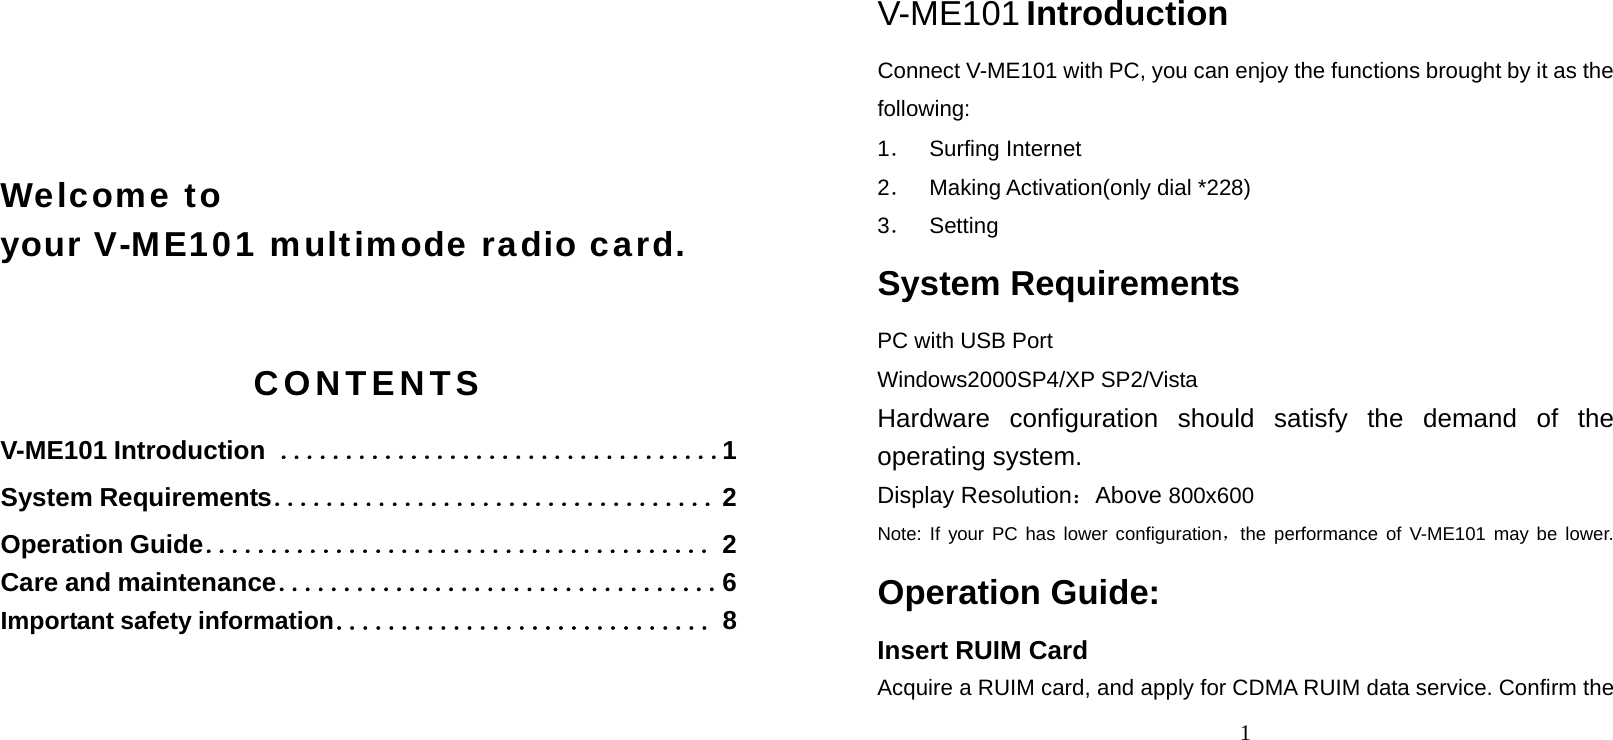     Welcome to   your V-ME101 multimode radio card.  CONTENTS V-ME101 Introduction  ．．．．．．．．．．．．．．．．．．．．．．．．．．．．．．．．．．1 System Requirements．．．．．．．．．．．．．．．．．．．．．．．．．．．．．．．．．．2 Operation Guide．．．．．．．．．．．．．．．．．．．．．．．．．．．．．．．．．．．．．．．2 Care and maintenance．．．．．．．．．．．．．．．．．．．．．．．．．．．．．．．．．．6 Important safety information．．．．．．．．．．．．．．．．．．．．．．．．．．．．．8  1 V-ME101 Introduction Connect V-ME101 with PC, you can enjoy the functions brought by it as the following: 1． Surfing Internet 2． Making Activation(only dial *228) 3． Setting System Requirements PC with USB Port Windows2000SP4/XP SP2/Vista Hardware configuration should satisfy the demand of the operating system. Display Resolution：Above 800x600 Note: If your PC has lower configuration，the performance of V-ME101 may be lower. Operation Guide: Insert RUIM Card Acquire a RUIM card, and apply for CDMA RUIM data service. Confirm the 